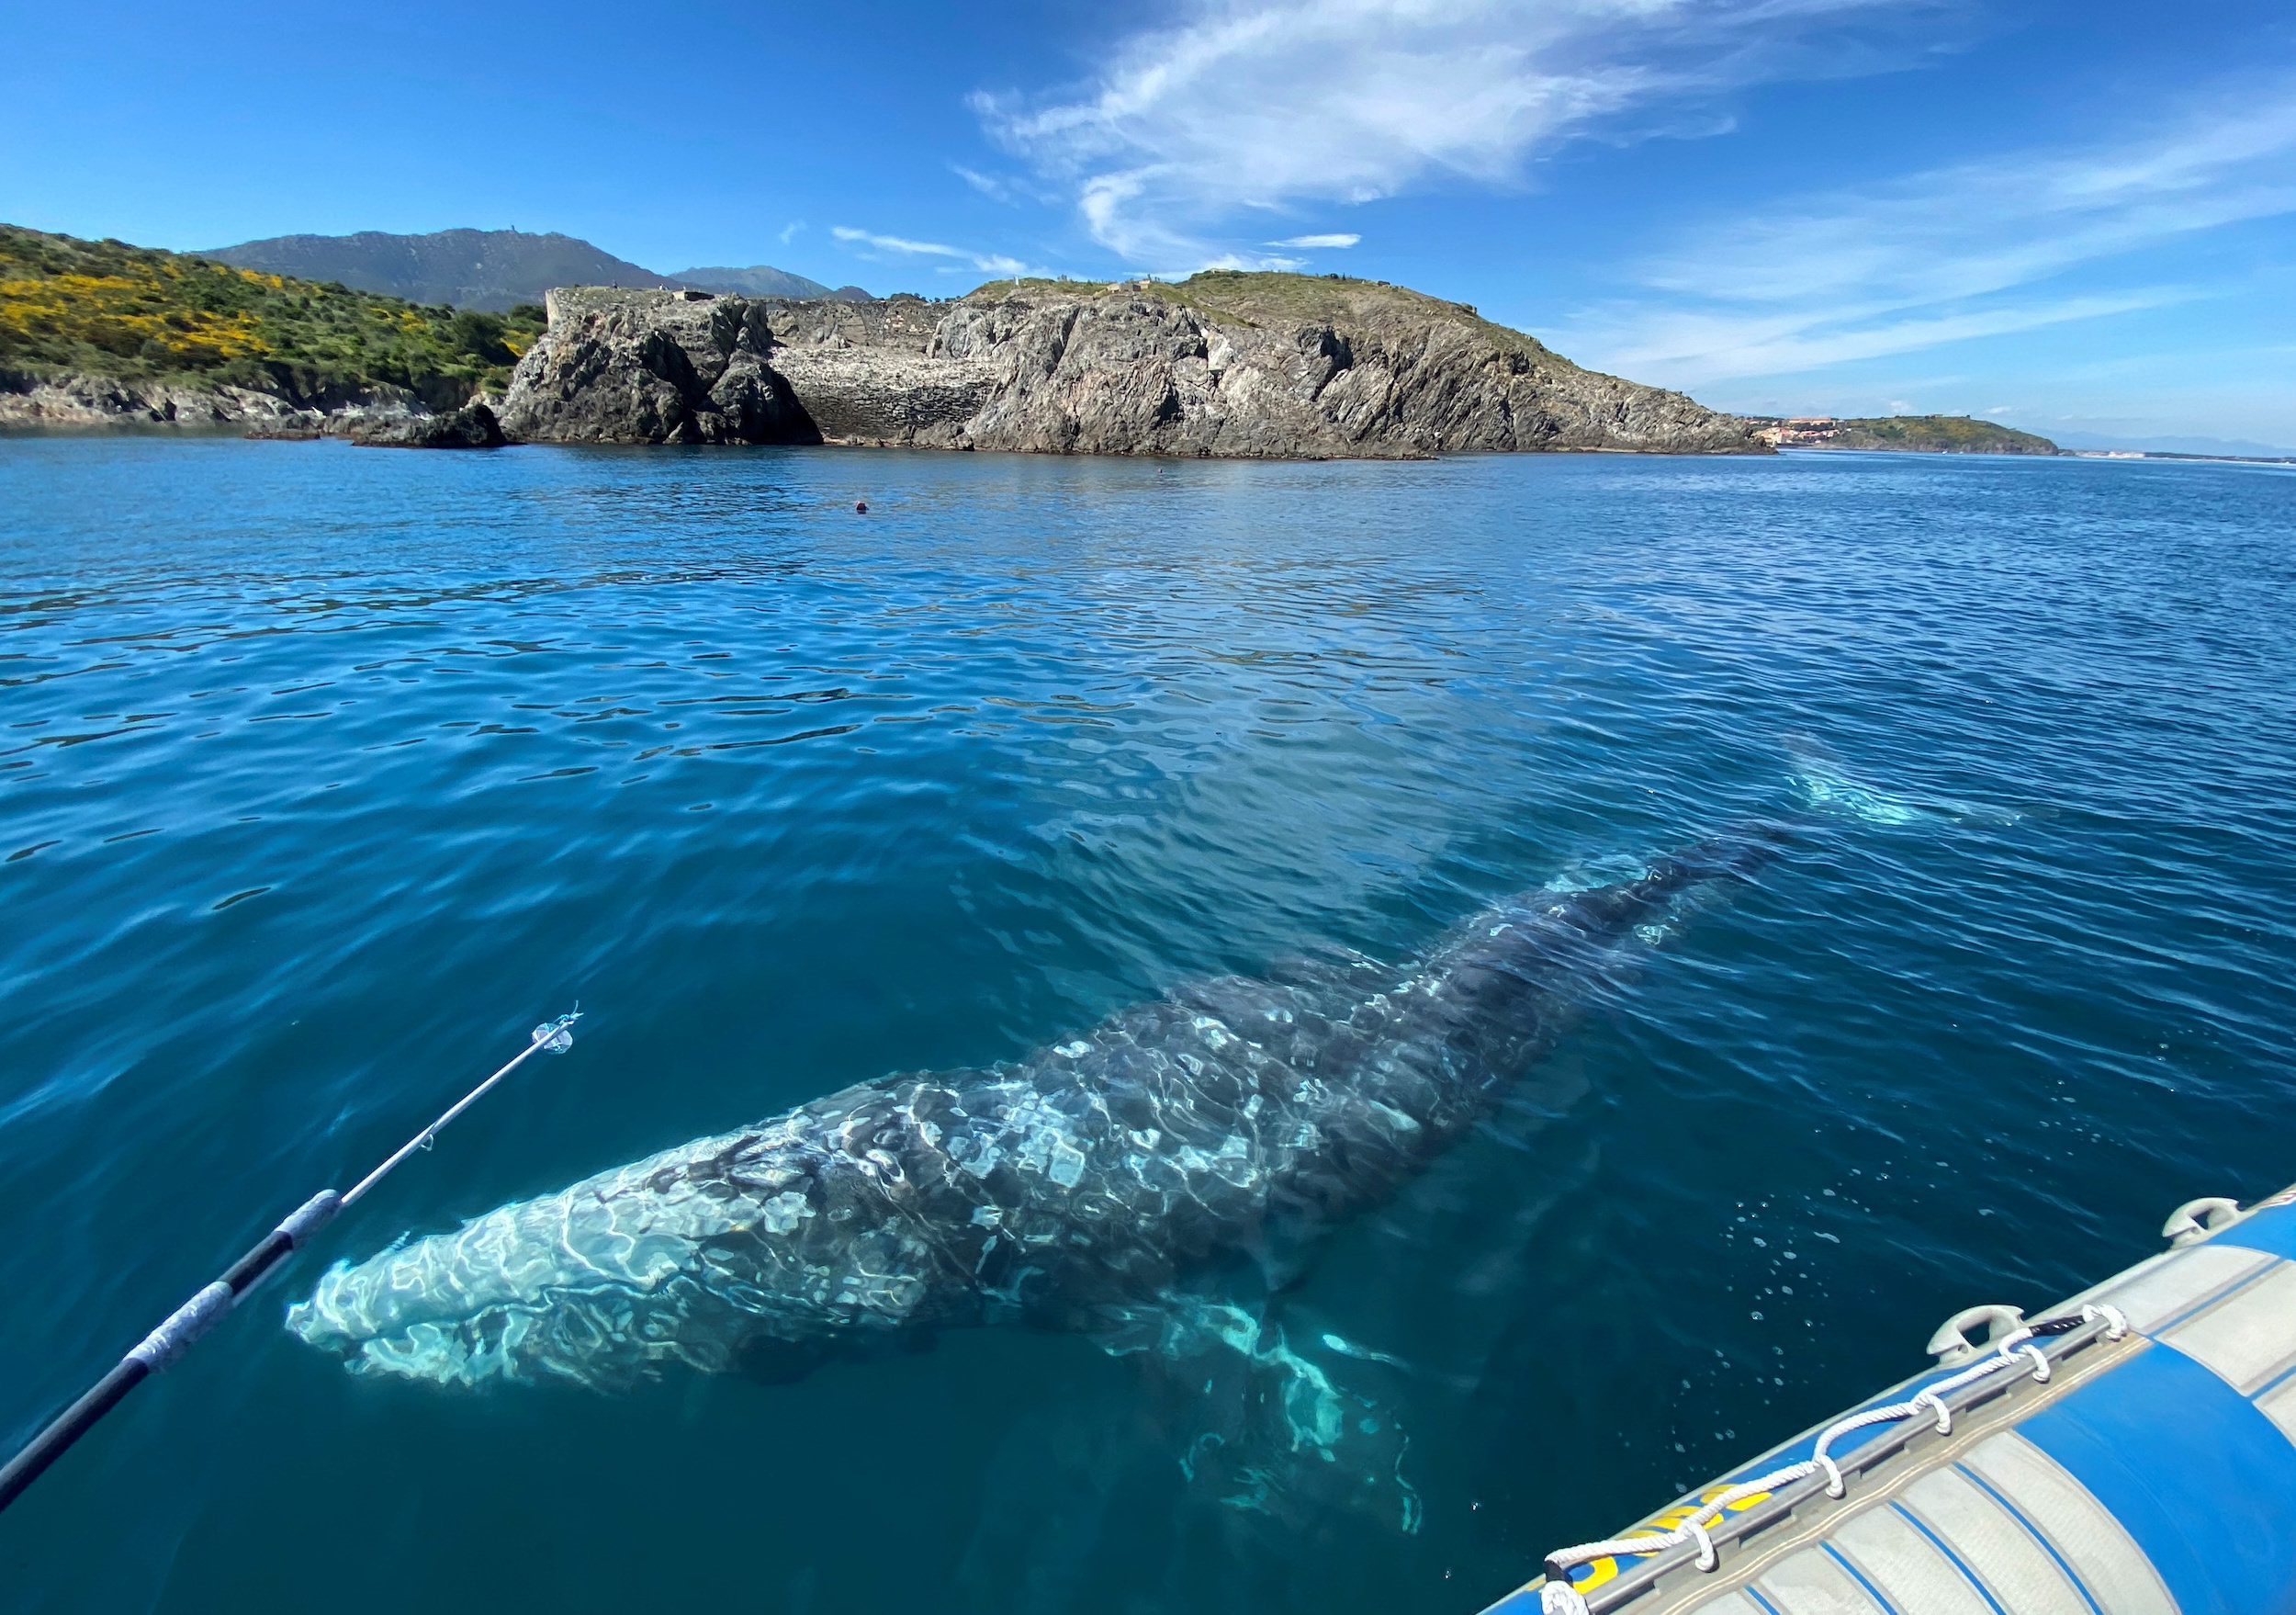 Wally, the lost gray whale calf in the Mediterranean Sea